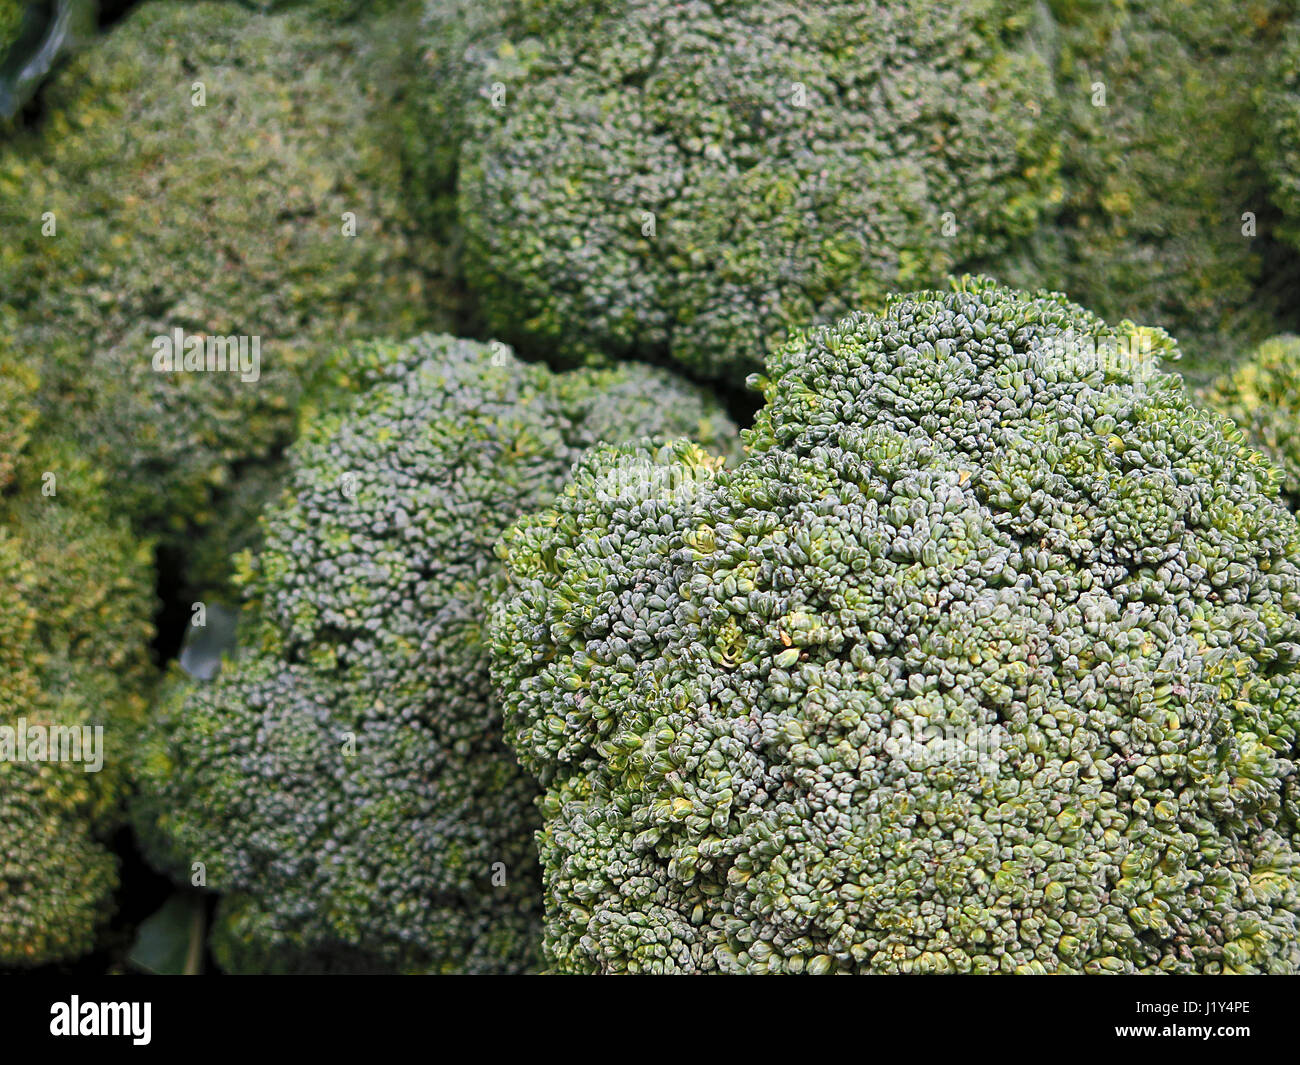 Brocoli for sale at the Farmers Market Stock Photo